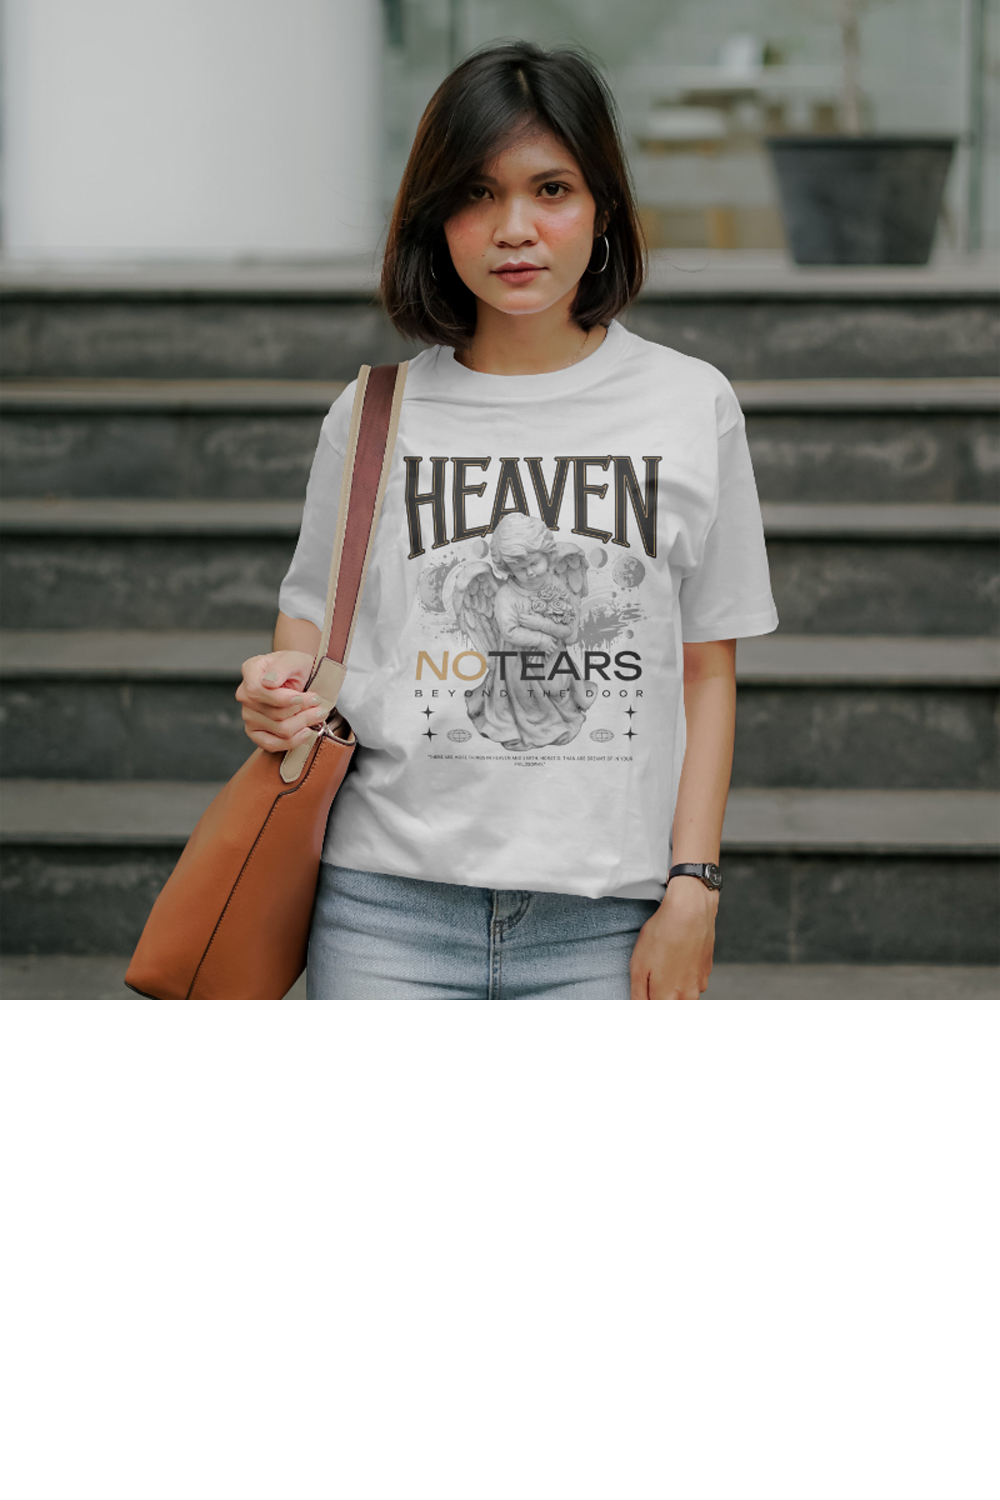 HEAVEN NOTEARS BEYOND THE DOOR – Quotes T-Shirt Design pinterest preview image.